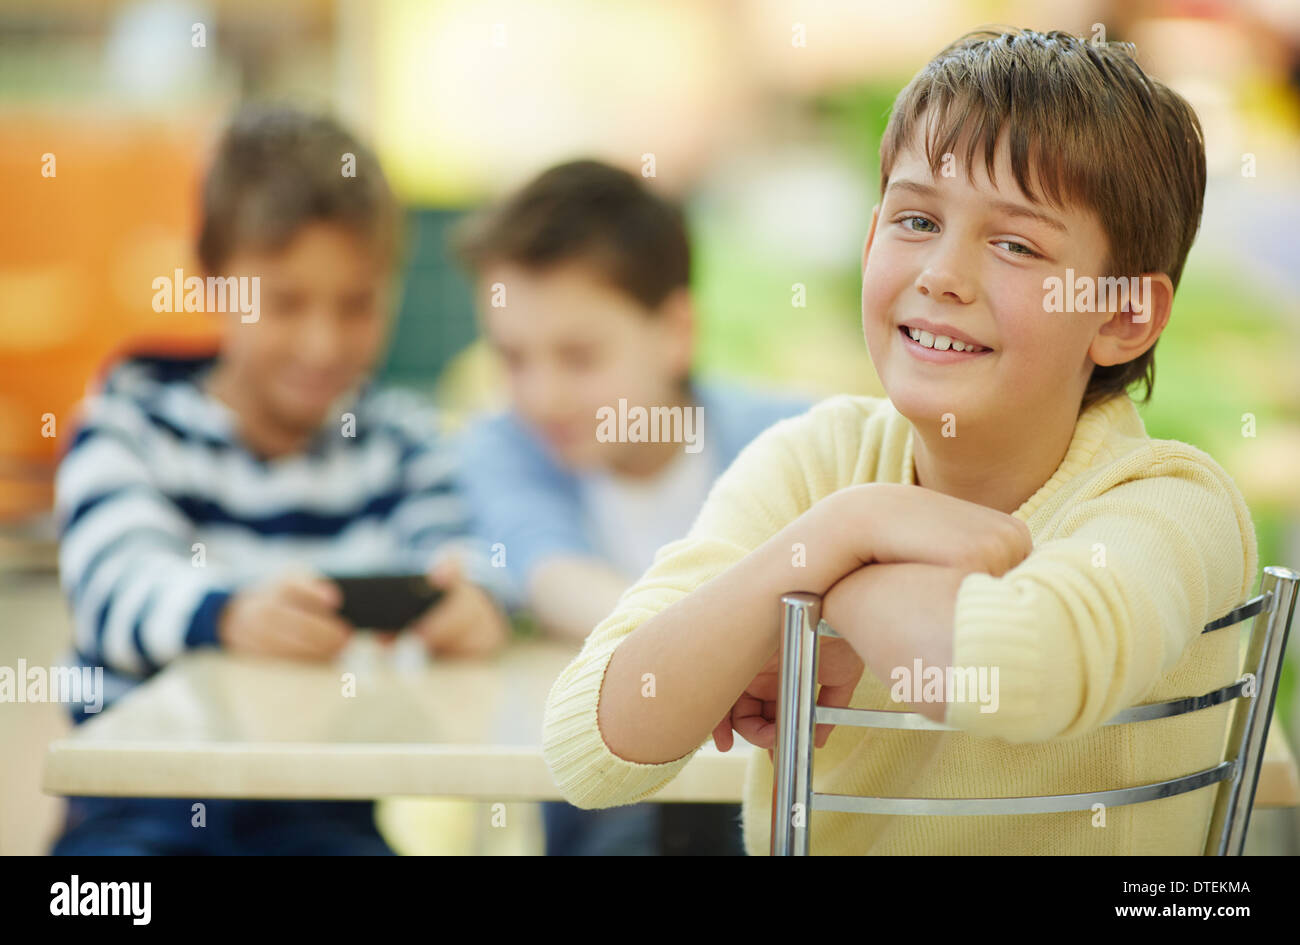 Boy smiling at camera in cafe Stock Photo